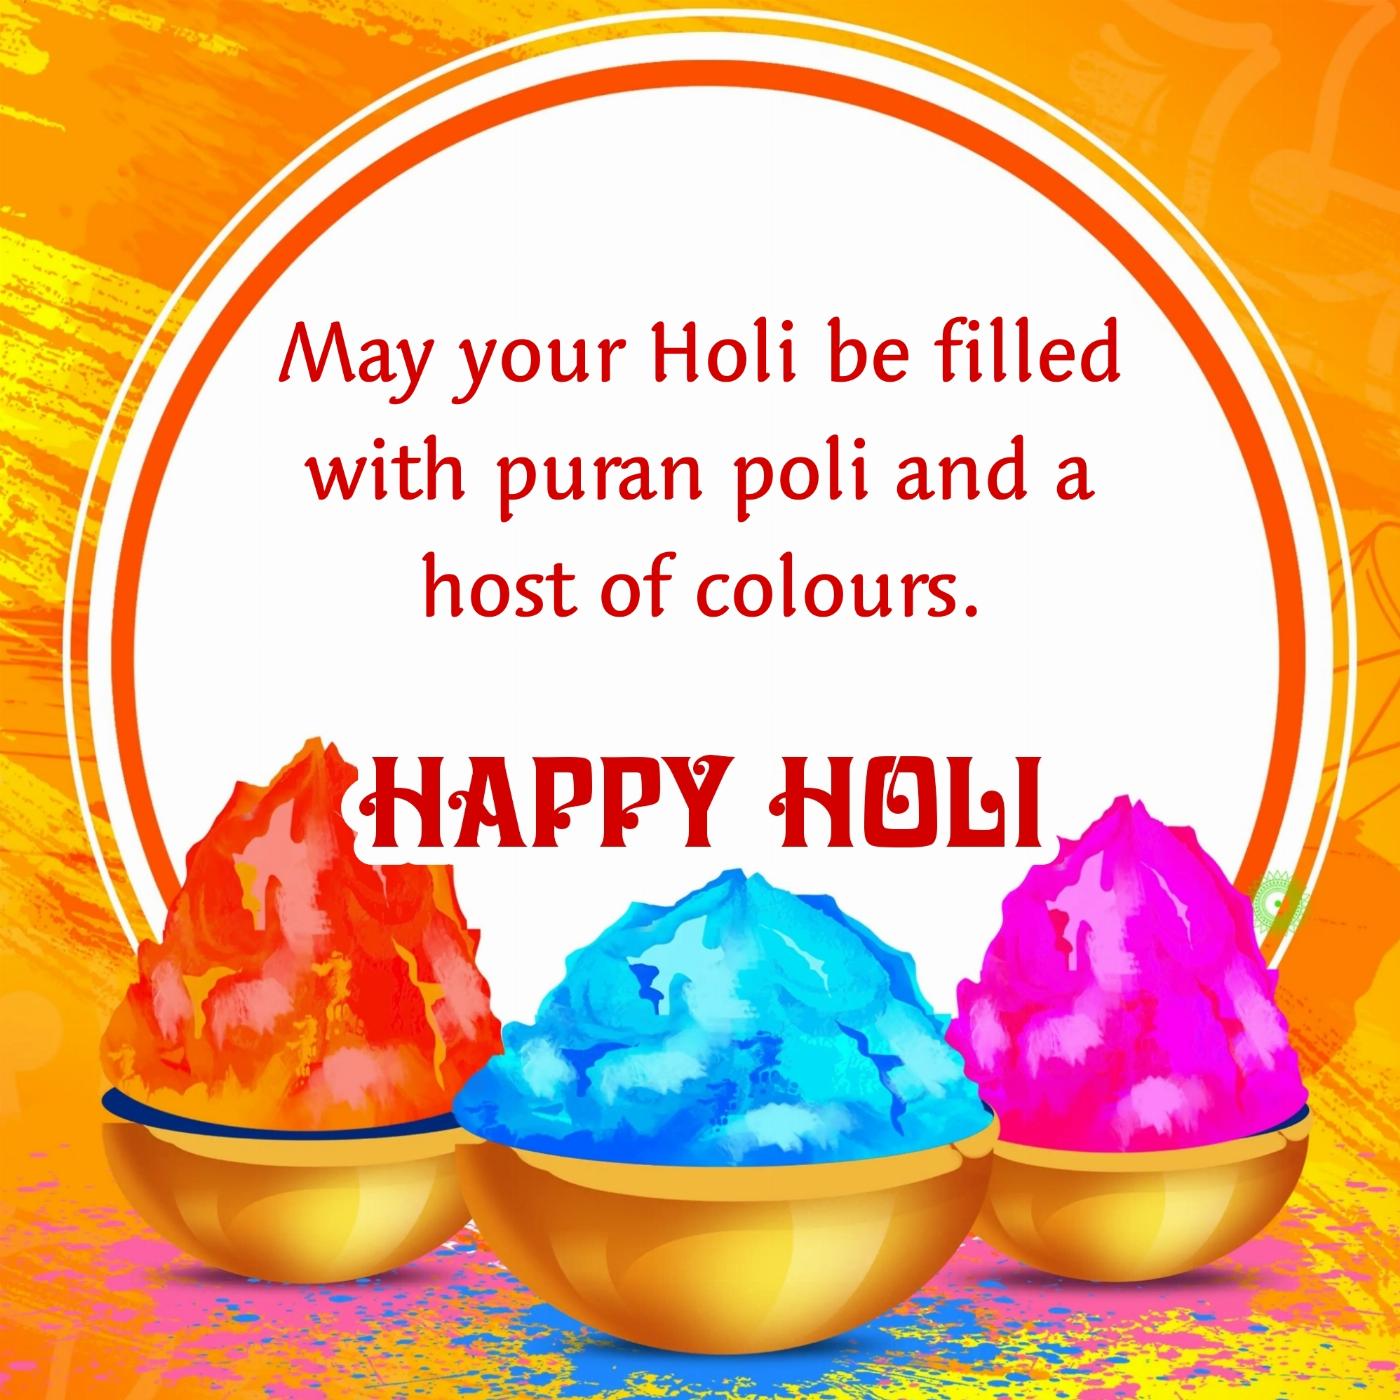 May your Holi be filled with puran poli and a host of colours